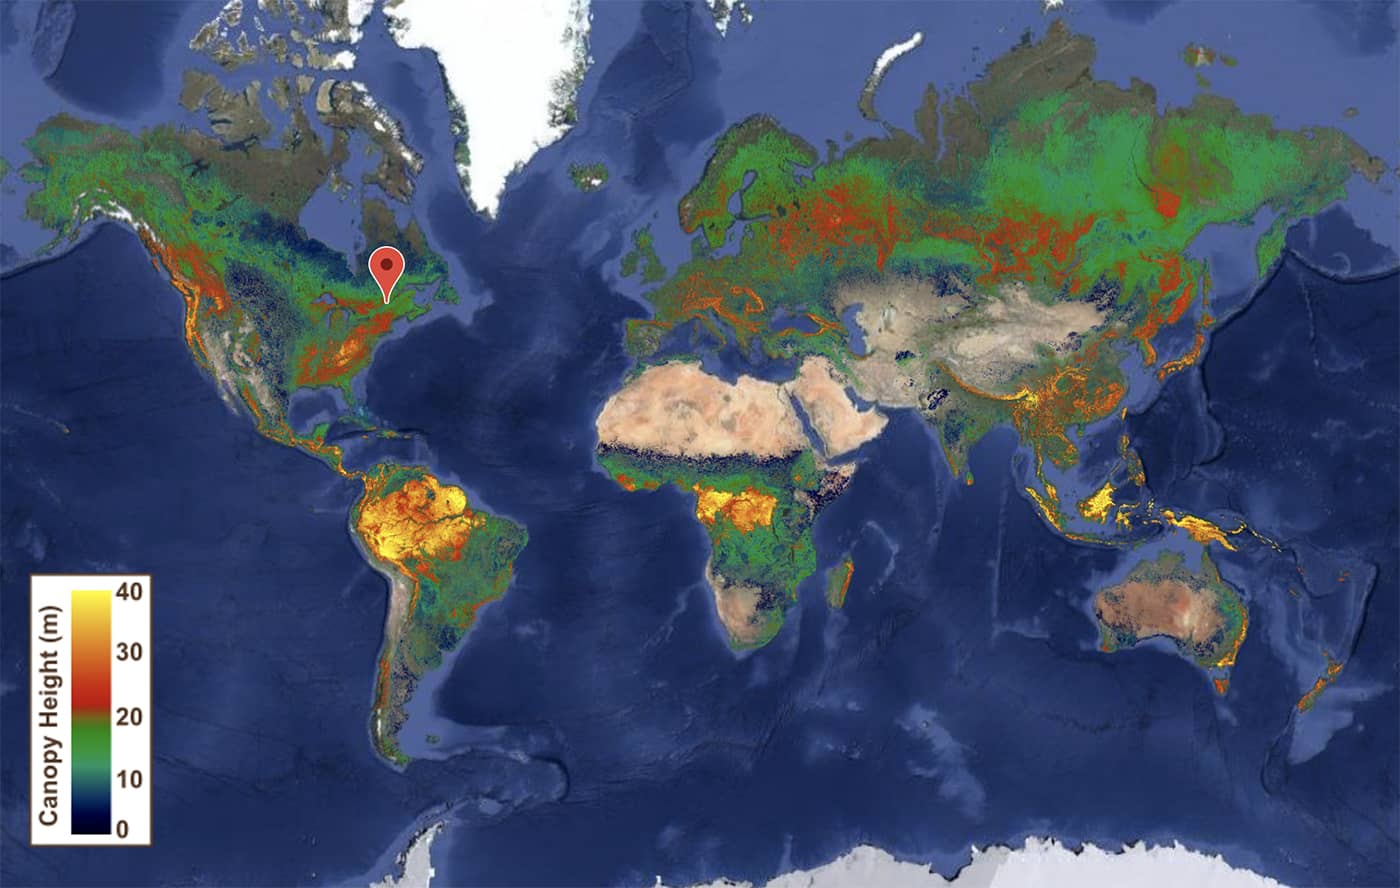 Global map of colored by vegetation height